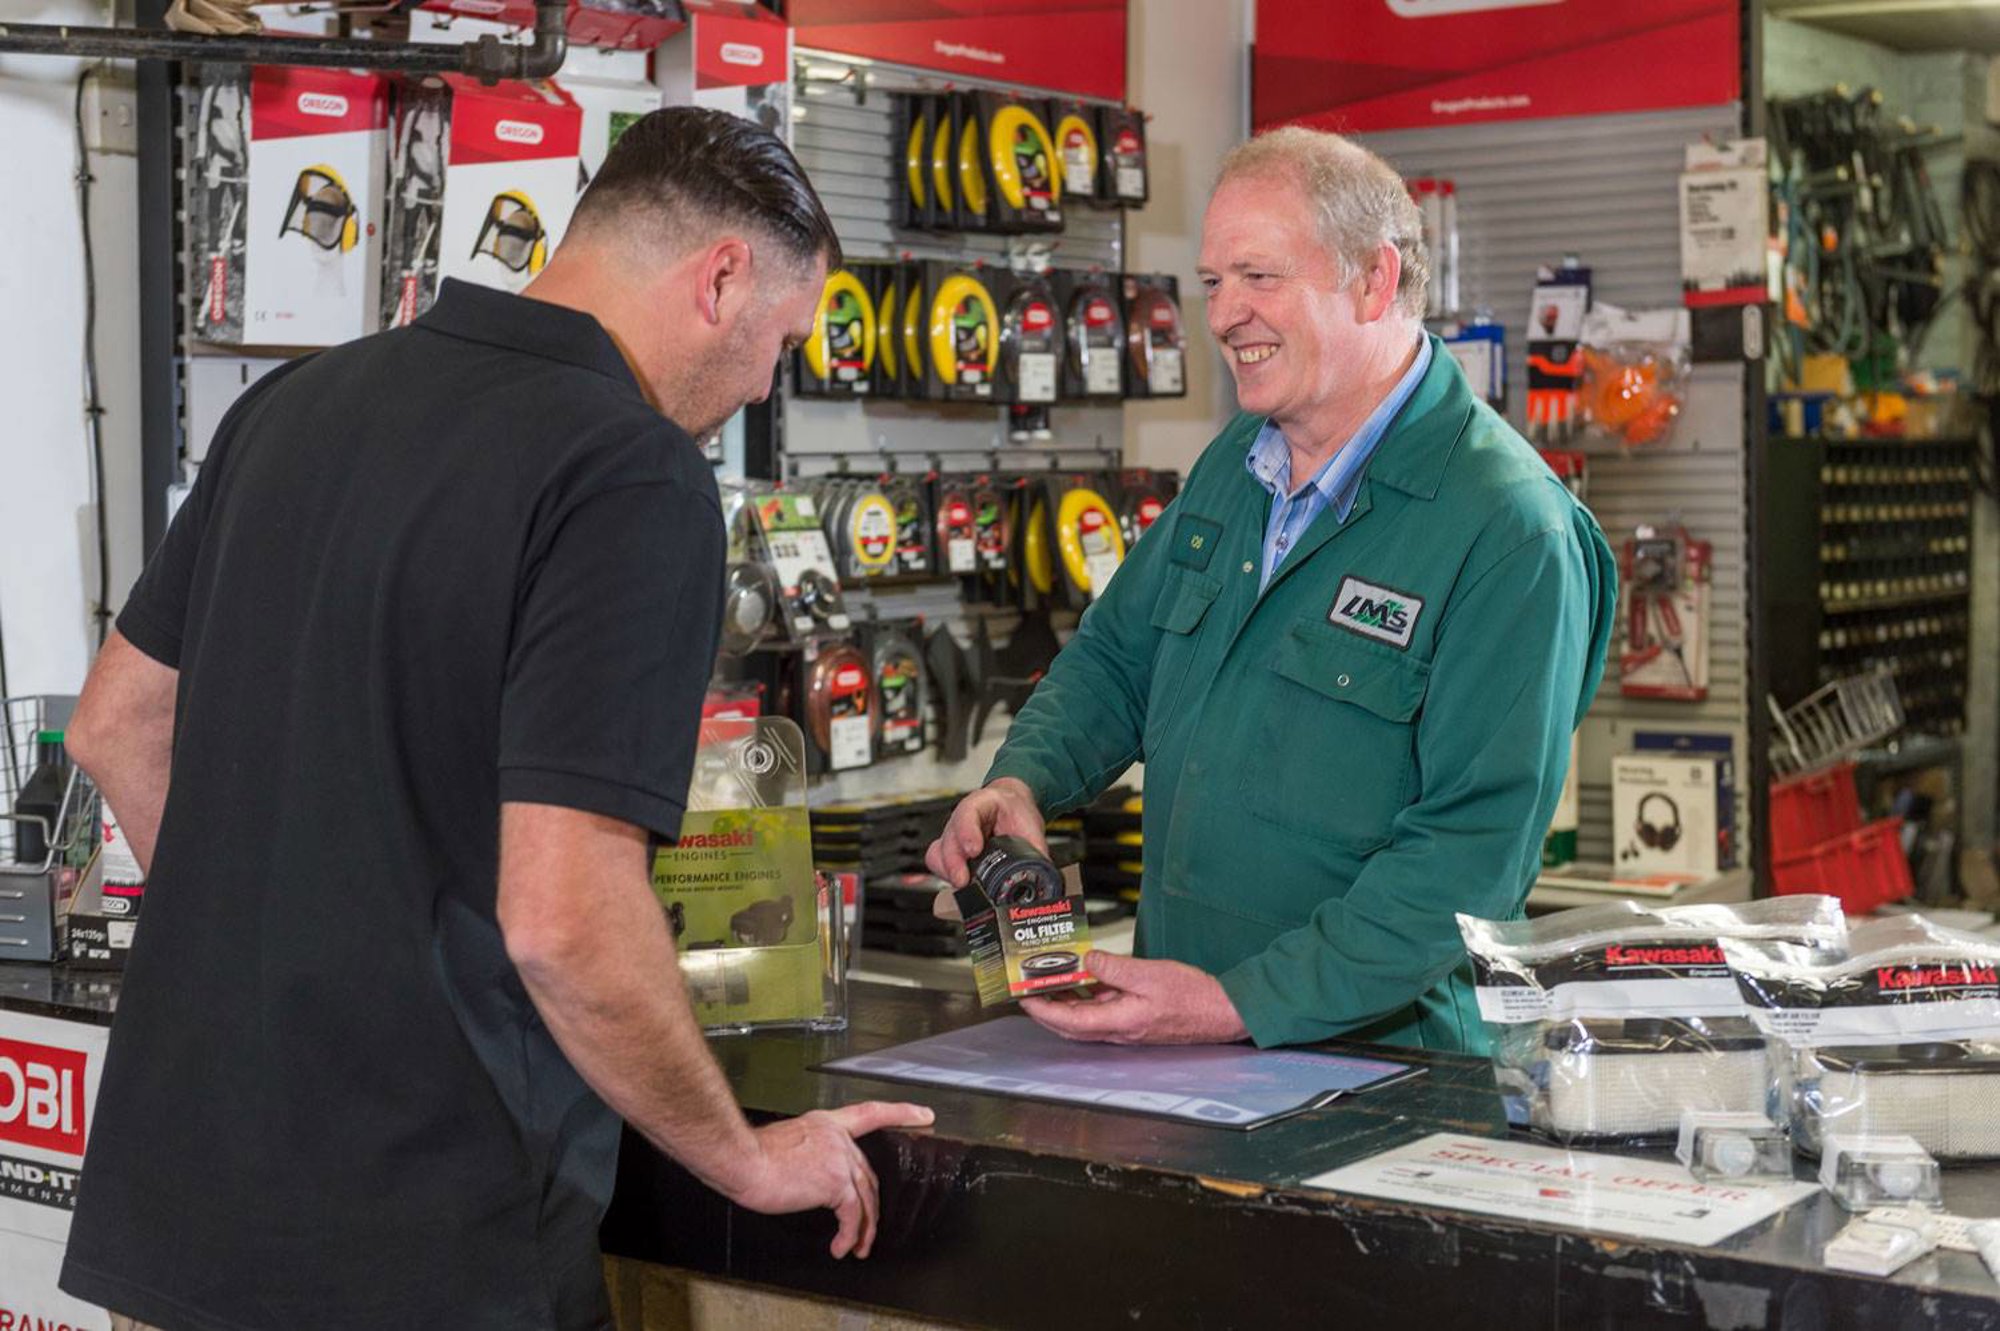 “I always buy Kawasaki Genuine Parts because in the long run it pays off. I don’t want to buy an inferior part. It’s just not worth it to me.”